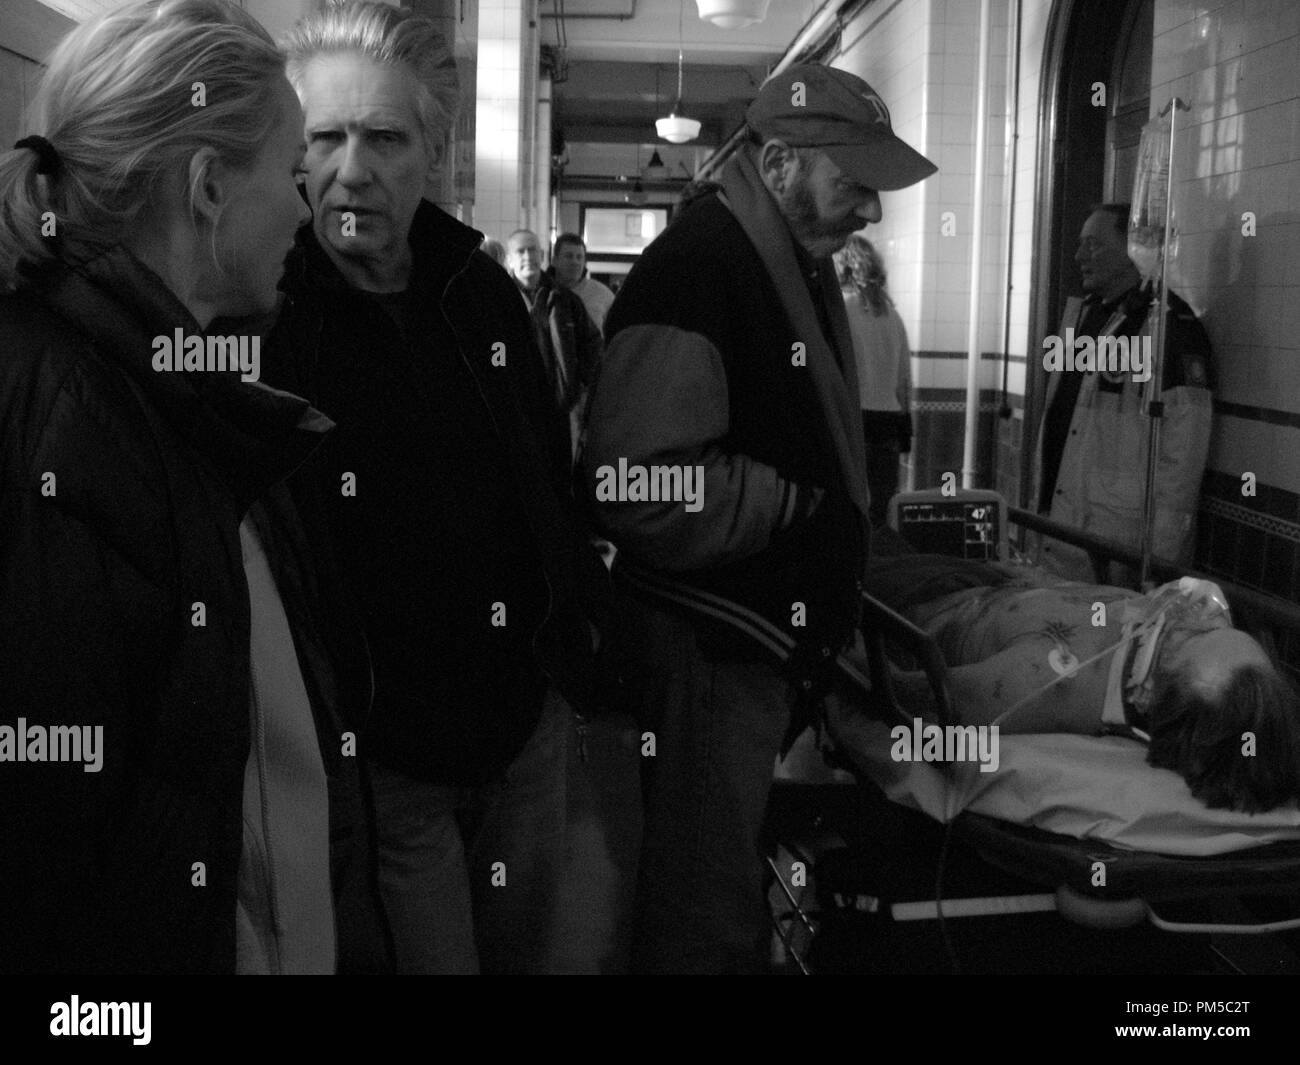 Studio Publicity Still from "Eastern Promises" Director David Cronenberg © 2007 Focus Features Photo credit: Peter Mountain   File Reference # 30738872THA  For Editorial Use Only -  All Rights Reserved Stock Photo